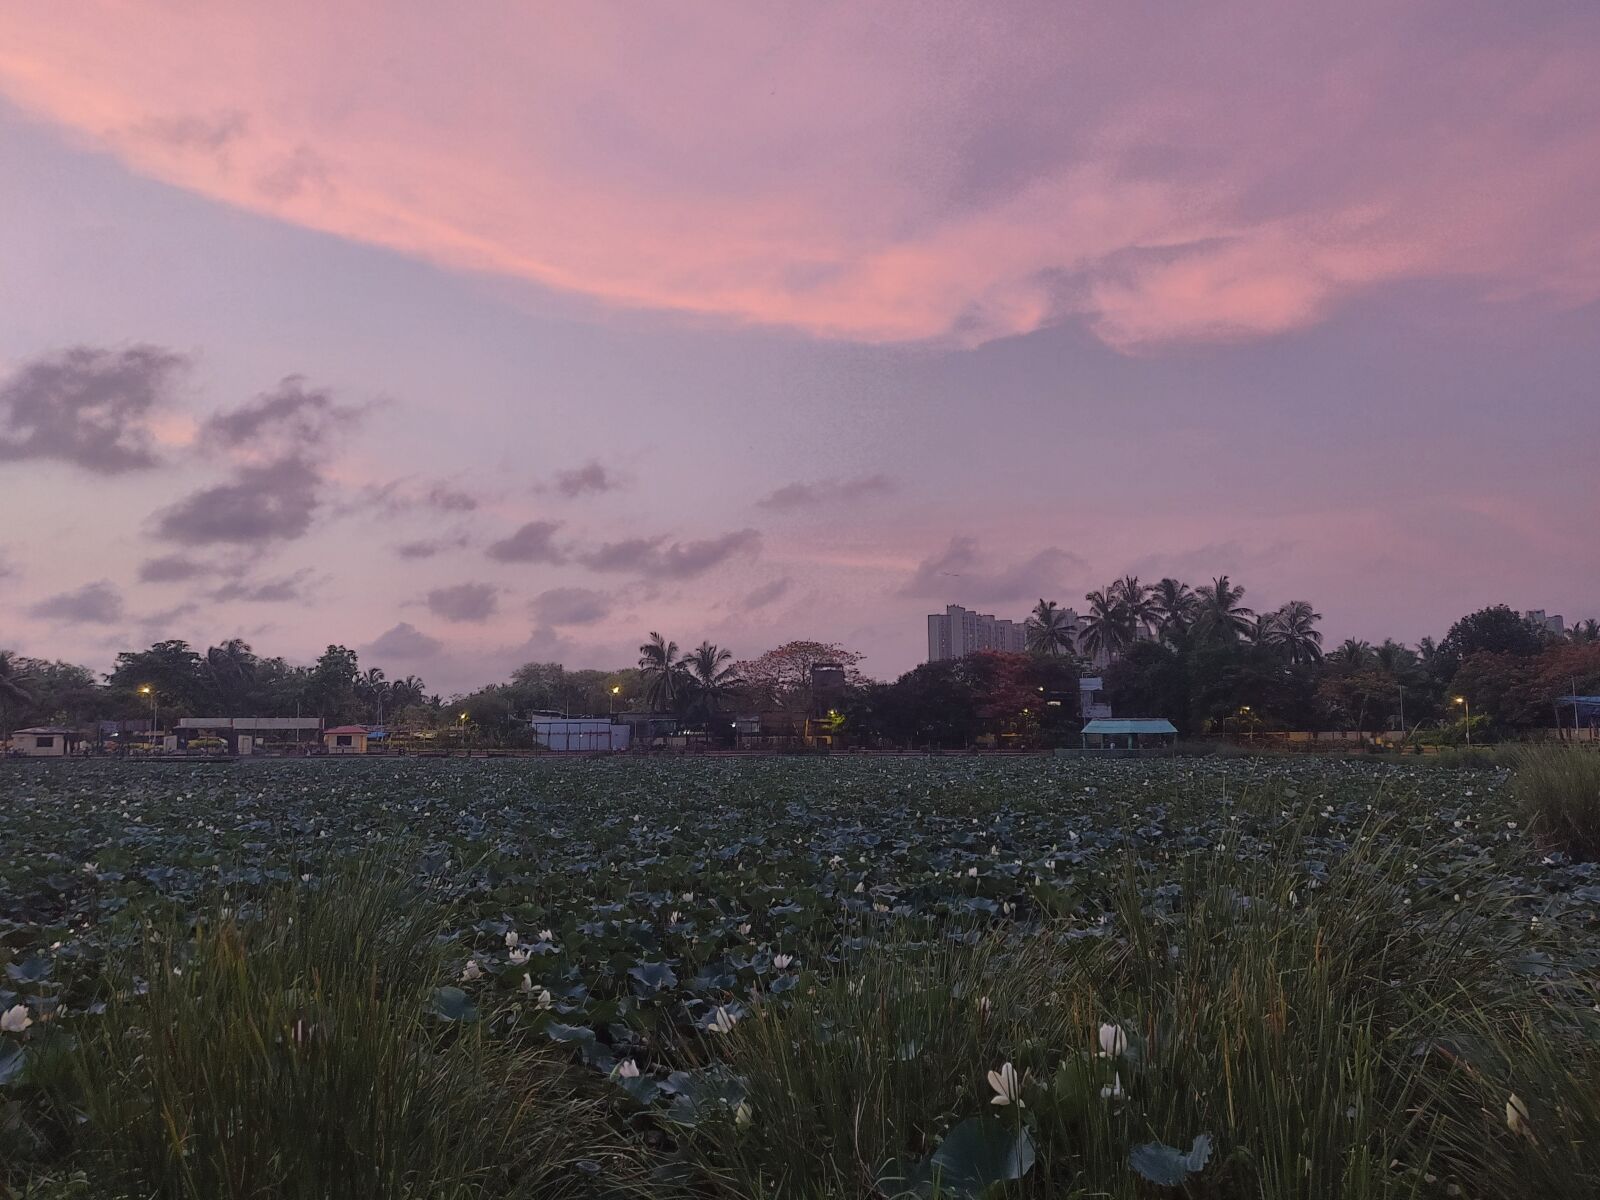 OnePlus A6000 sample photo. Lotus flower pond, evening photography